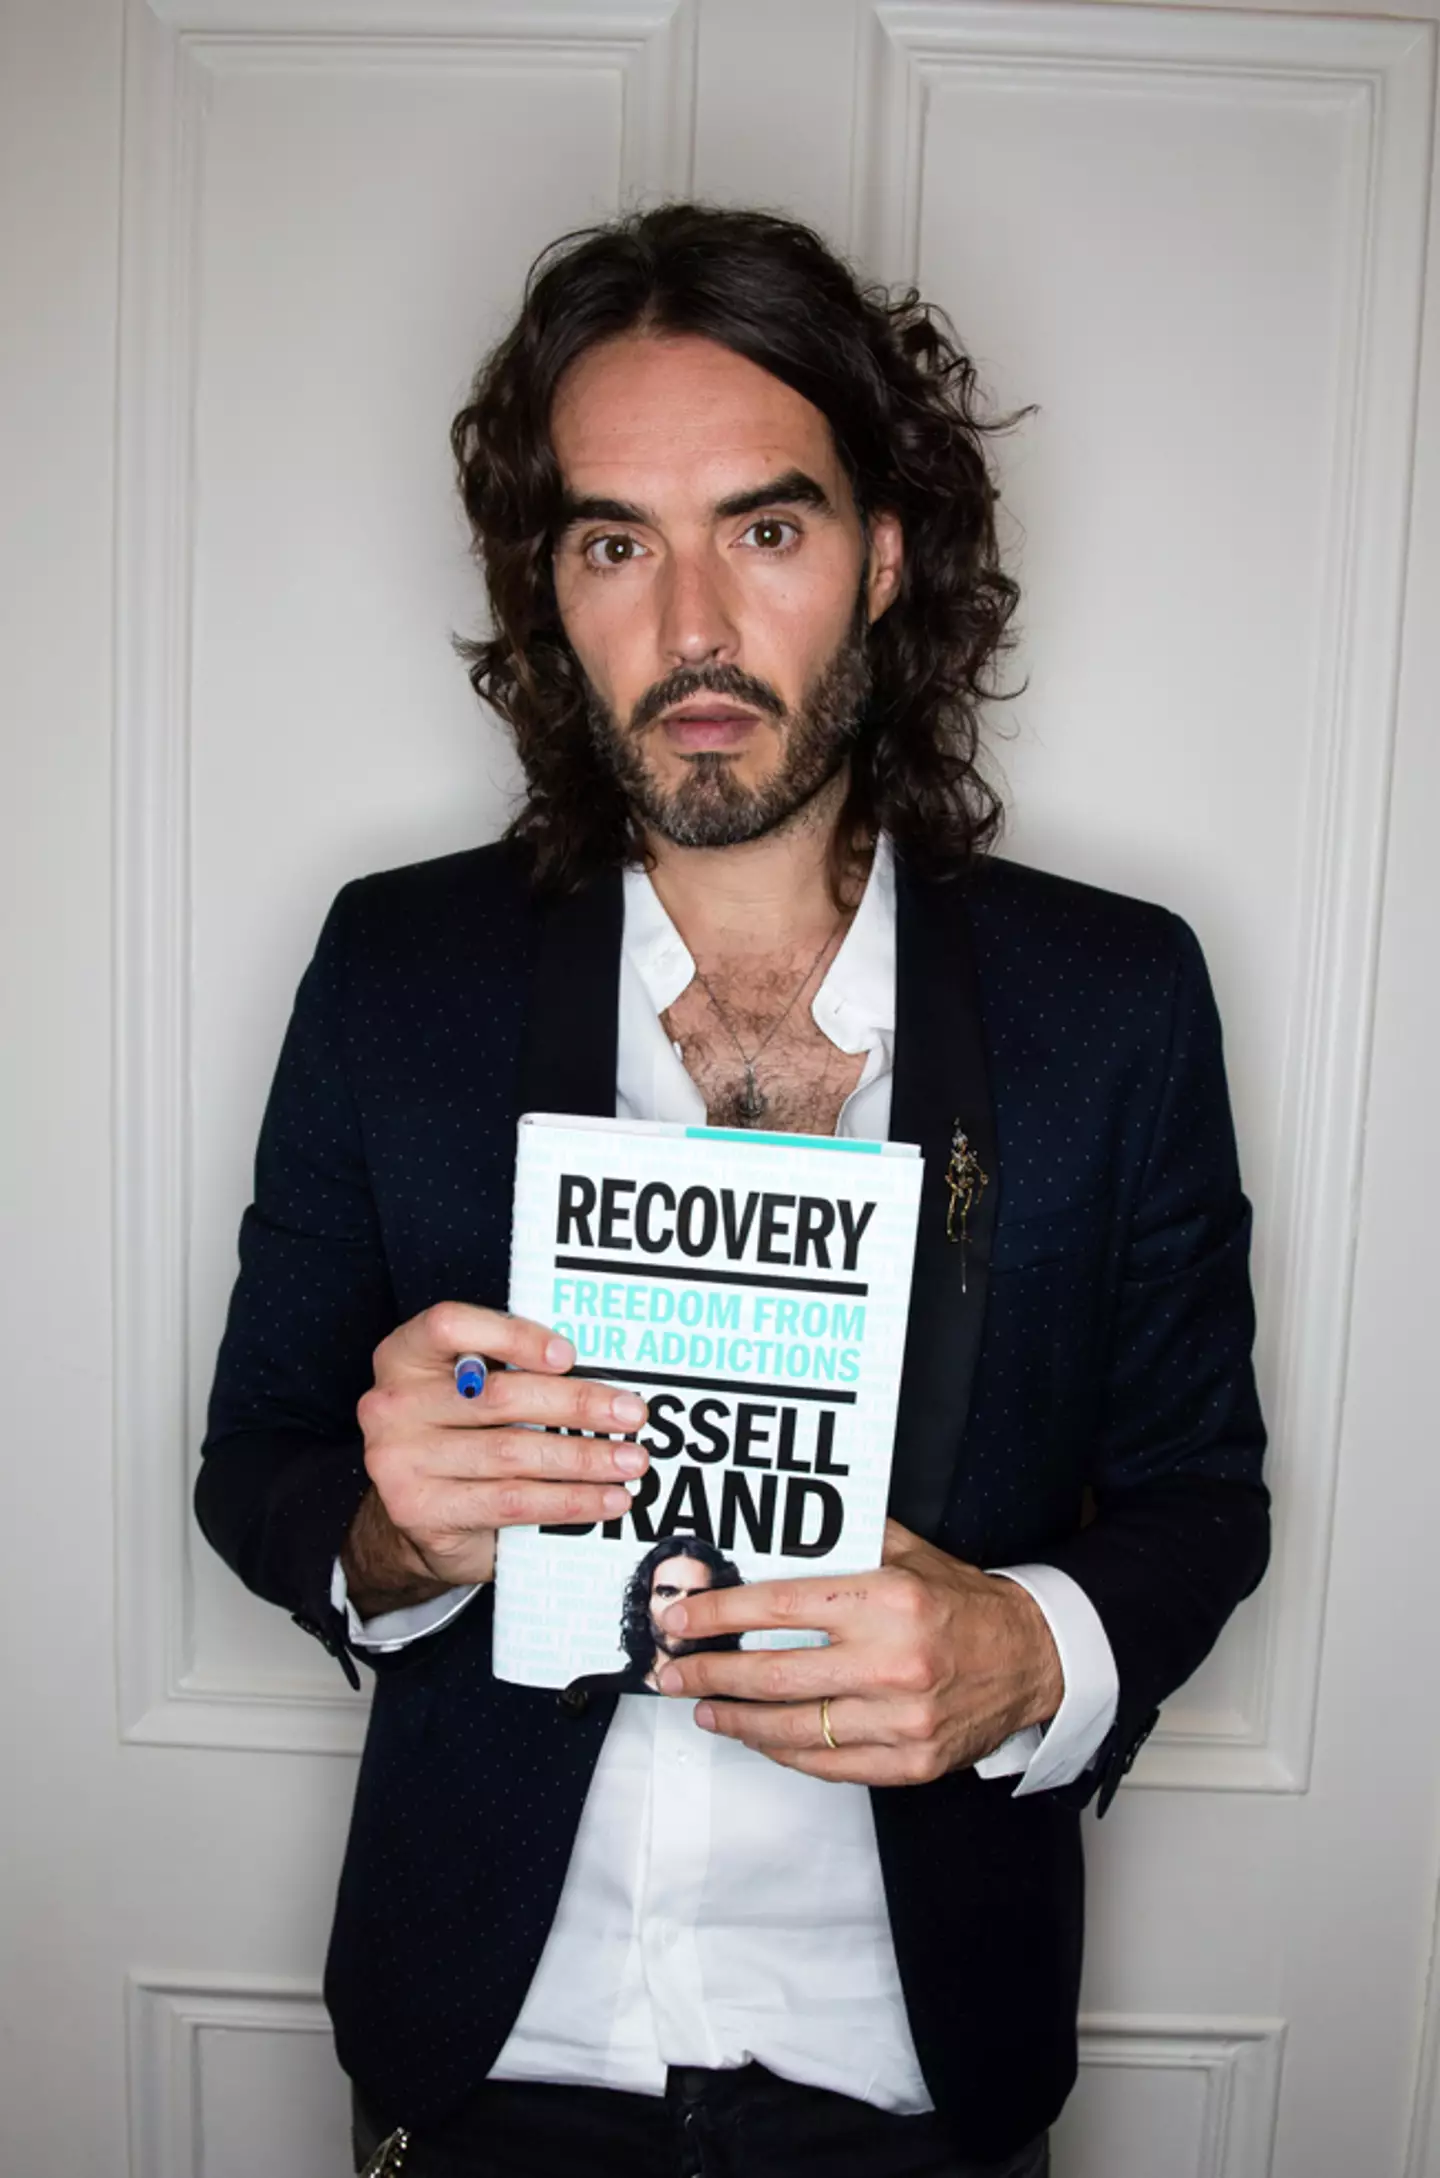 Multiple allegations have been made against Russell Brand, something he has denied.